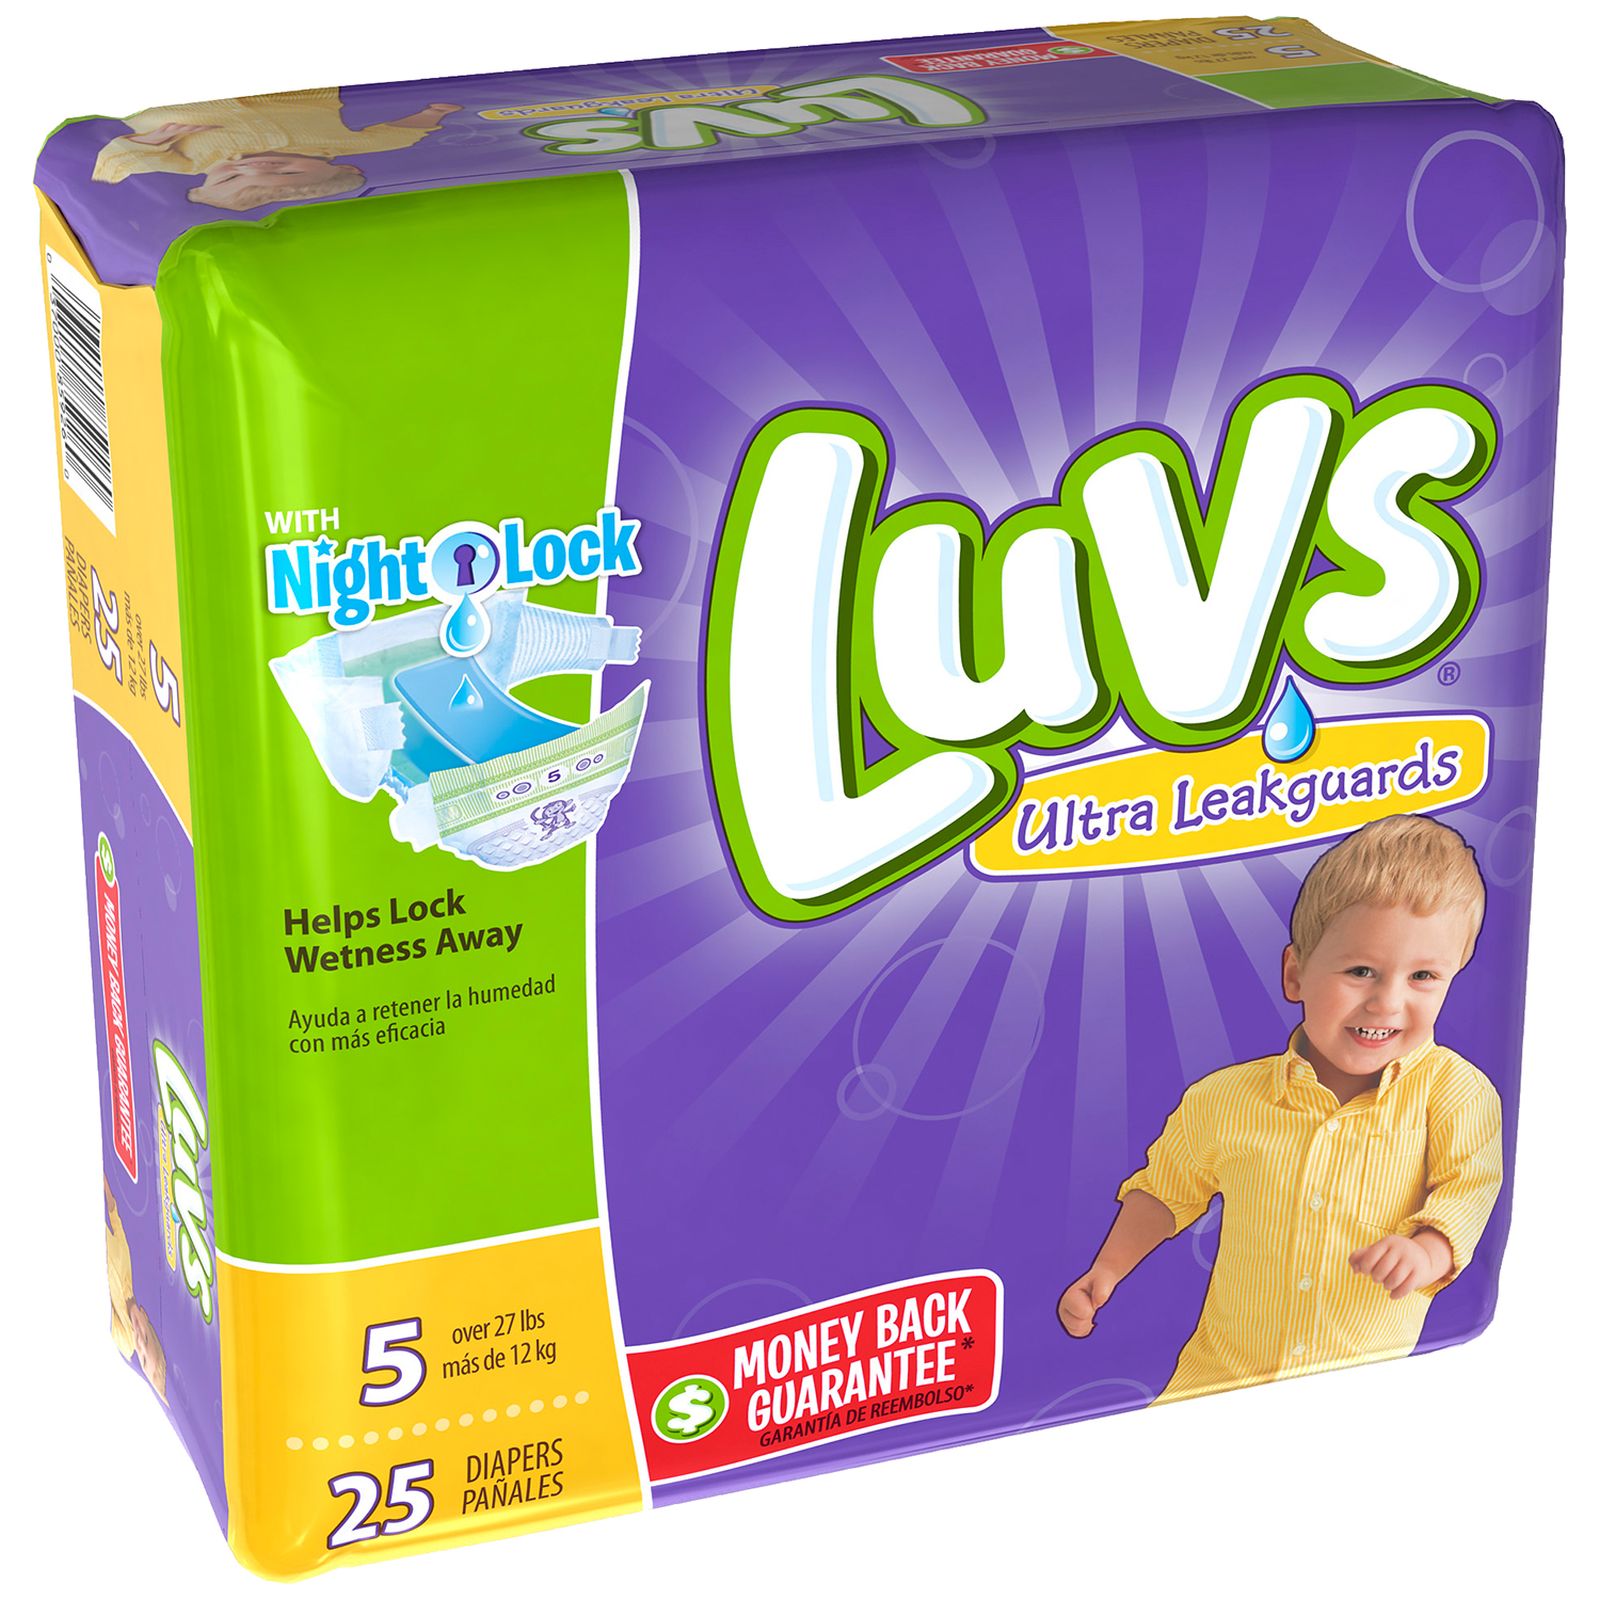 Luvs Ultra Leakguards Diapers with Night Lock